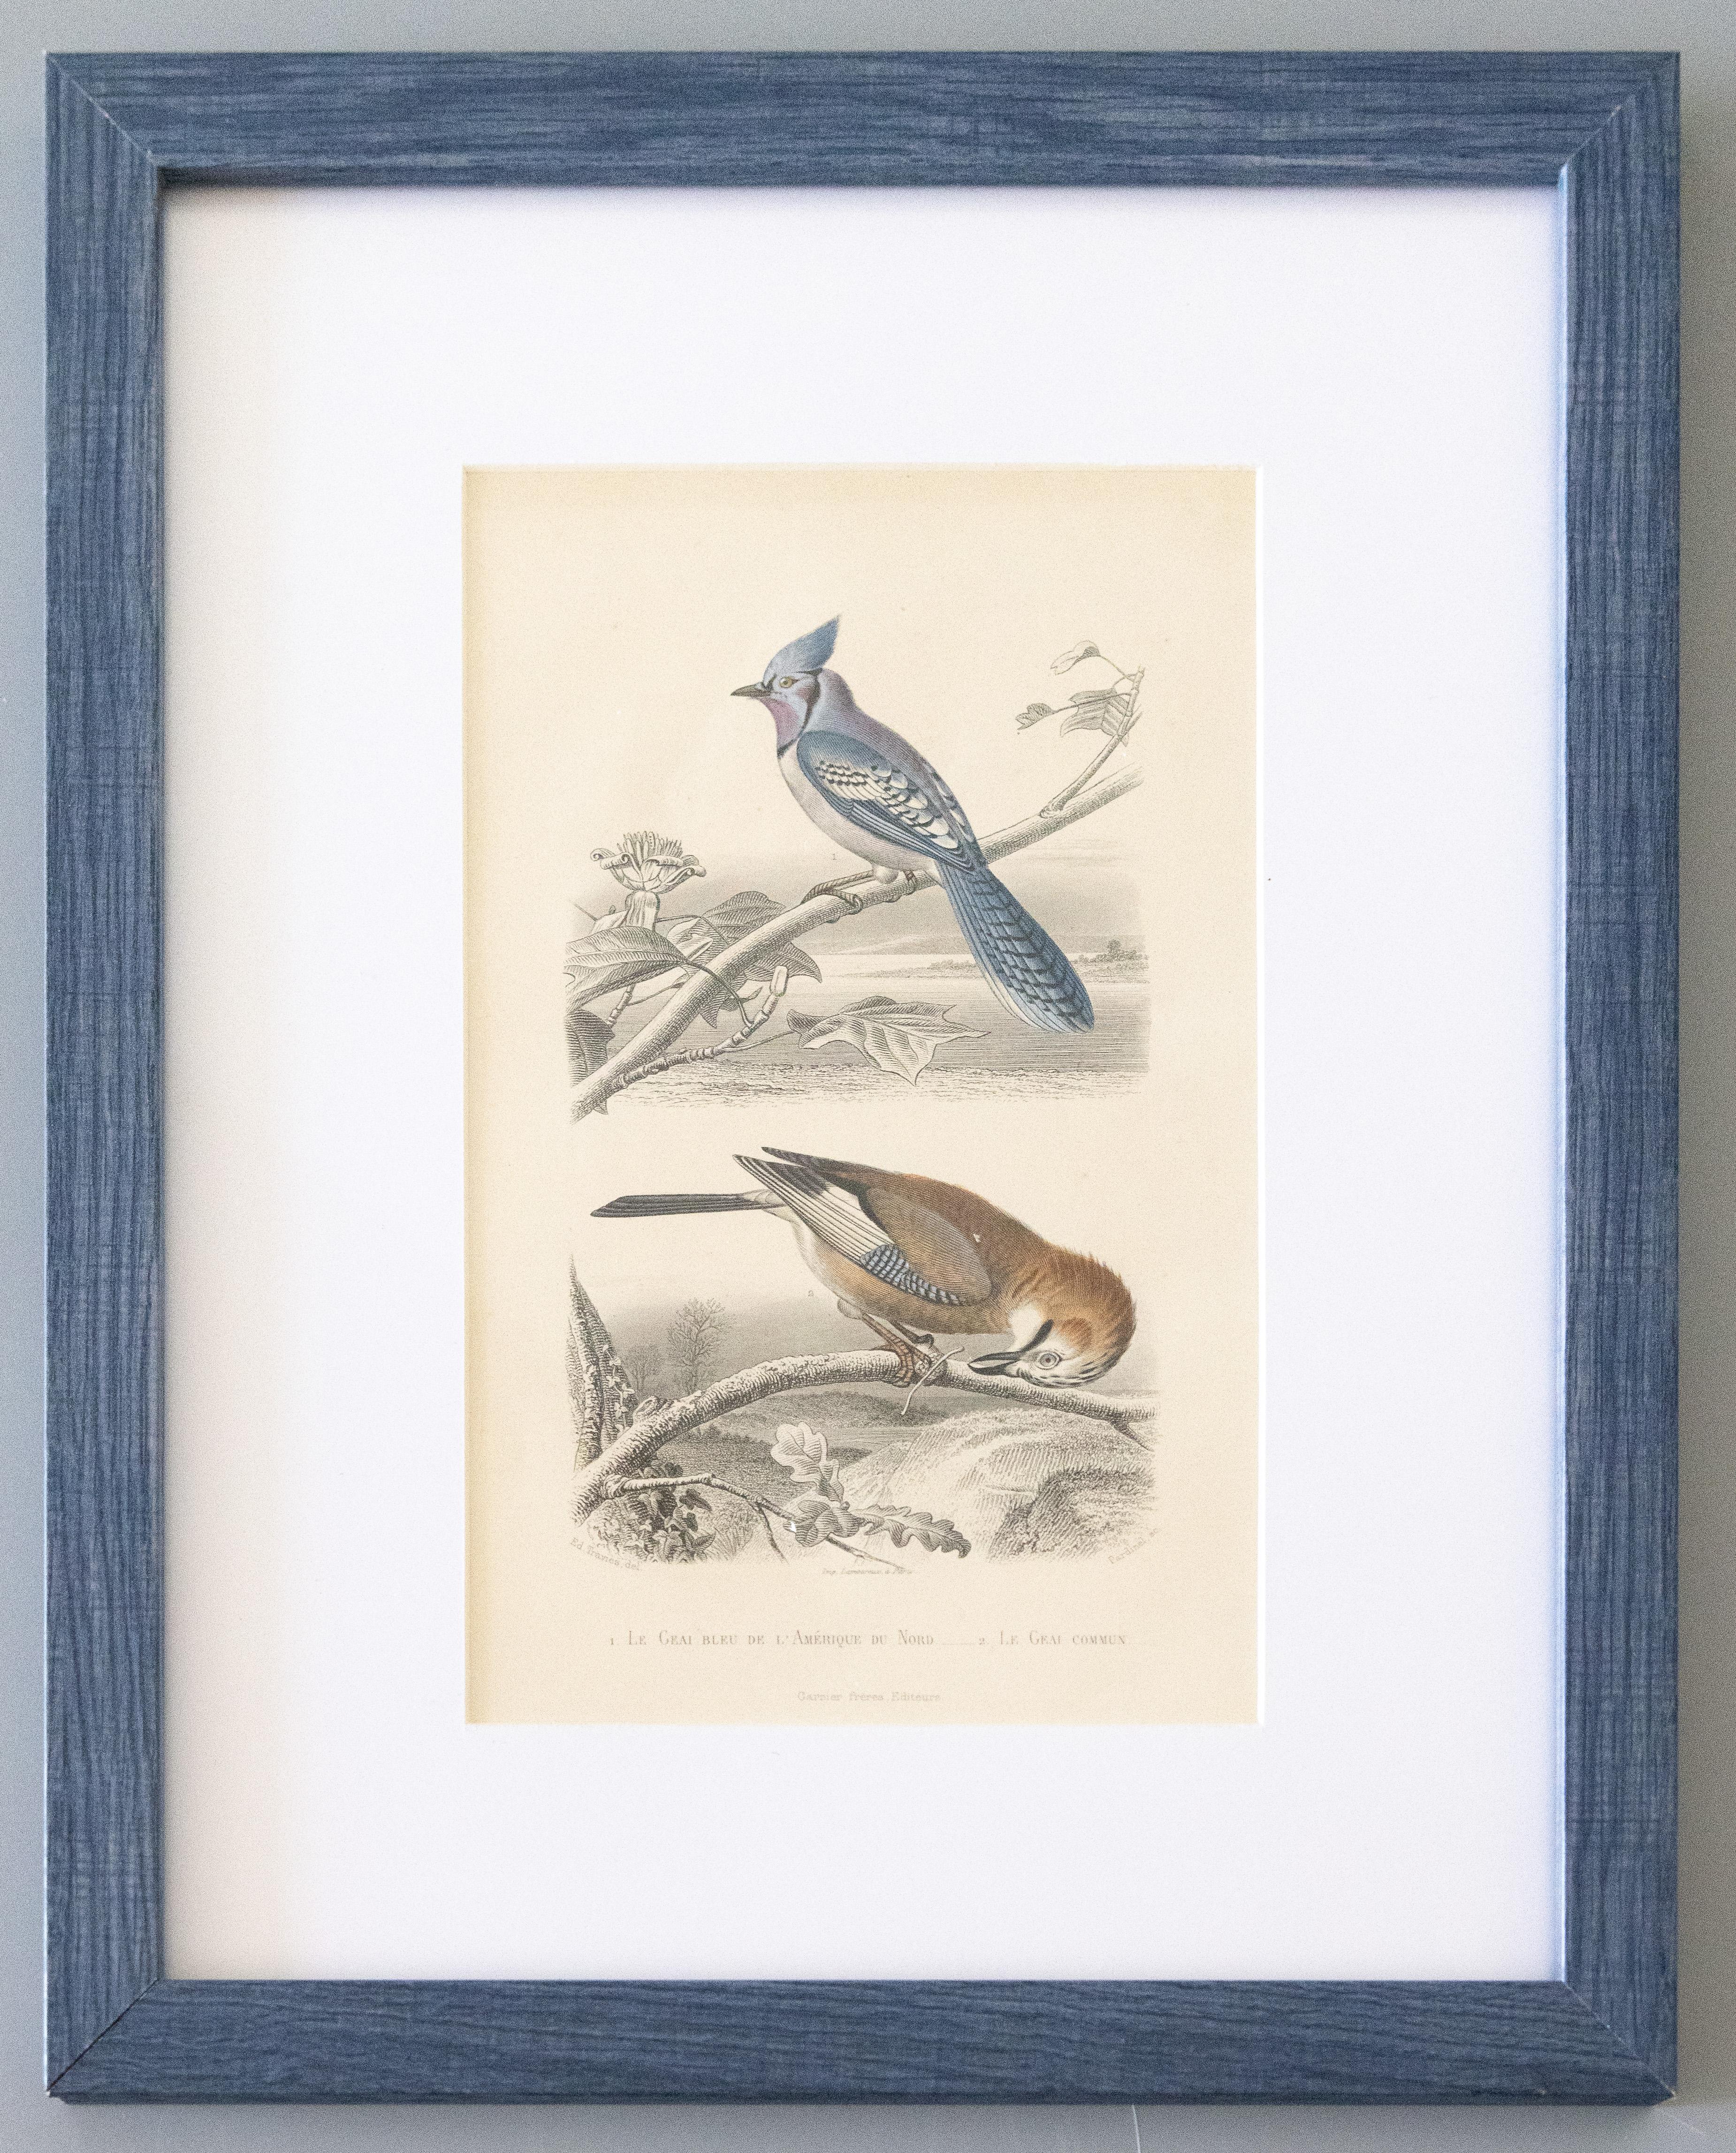 Country Custom Framed Antique Bird Engravings - Set of Two For Sale